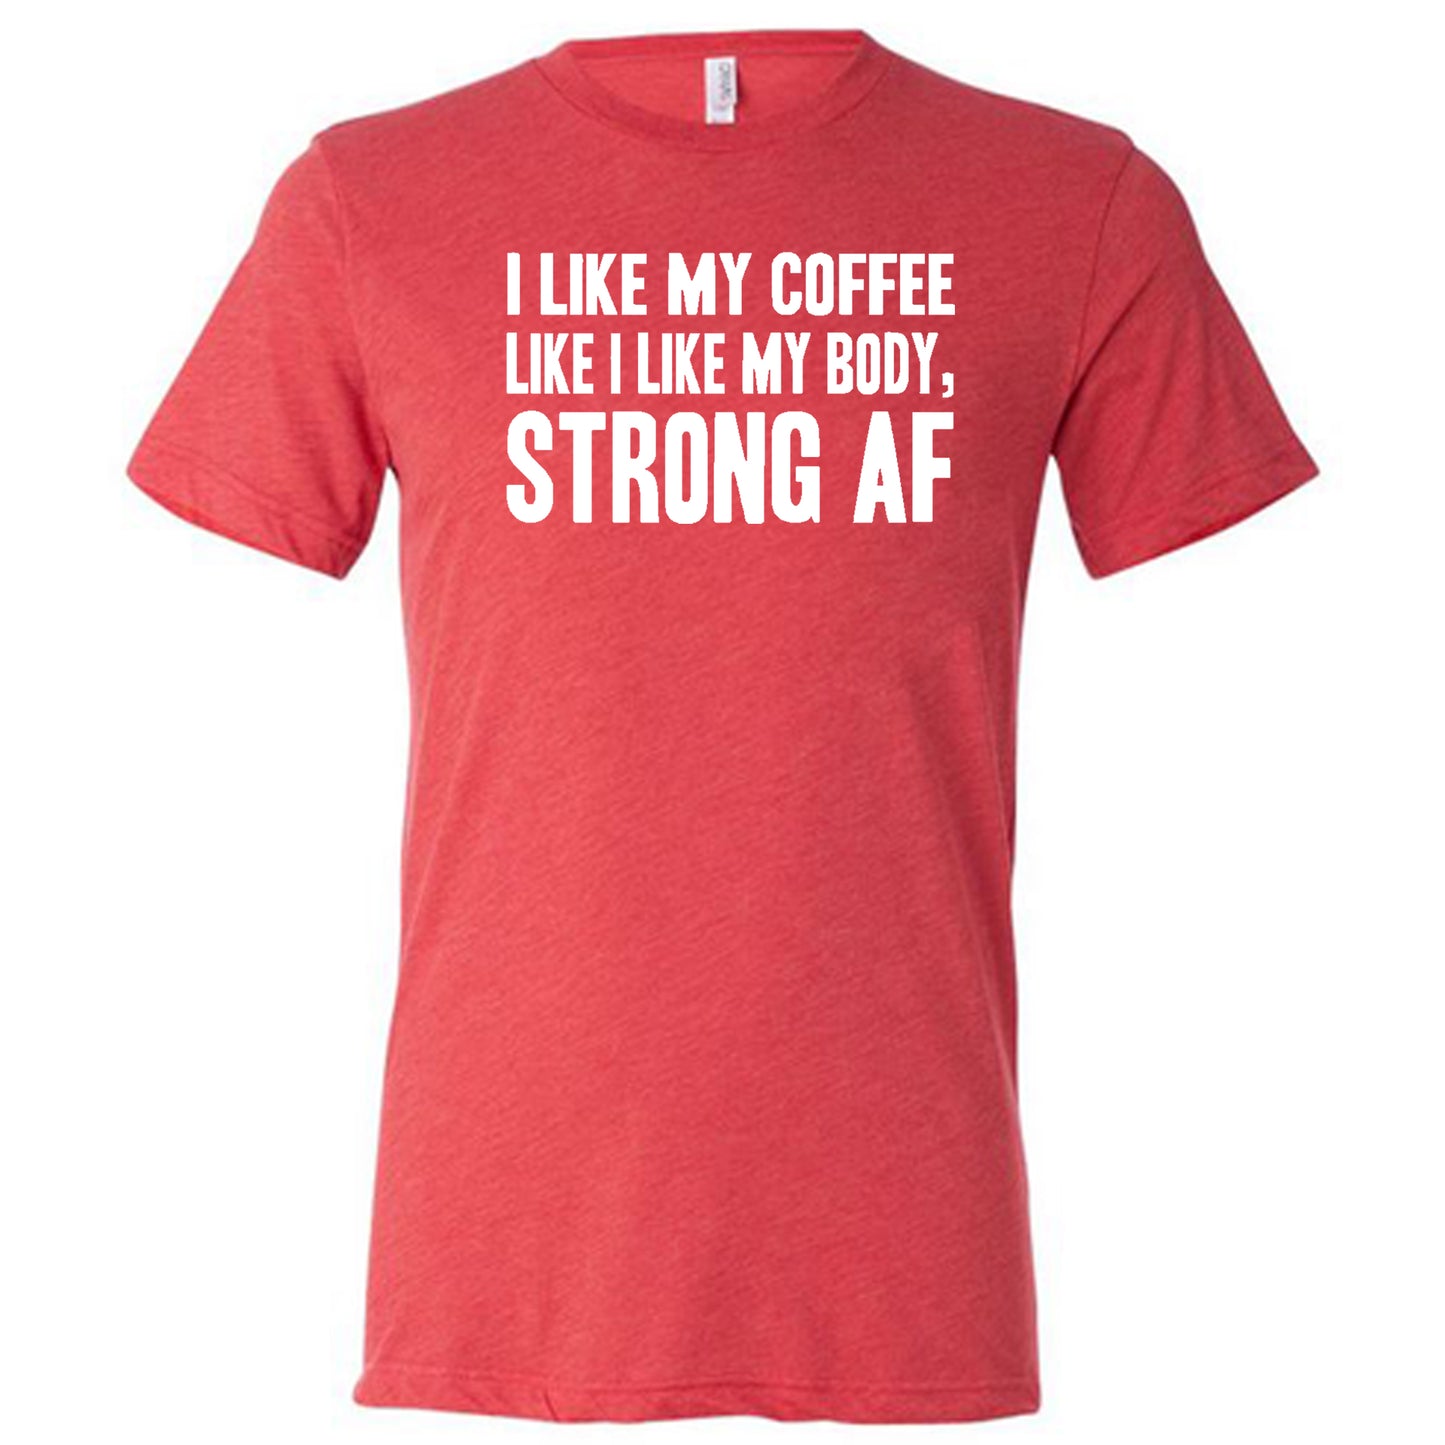 "I Like My Coffee Like I Like My Body Strong AF" quote in white lettering on red unisex tee